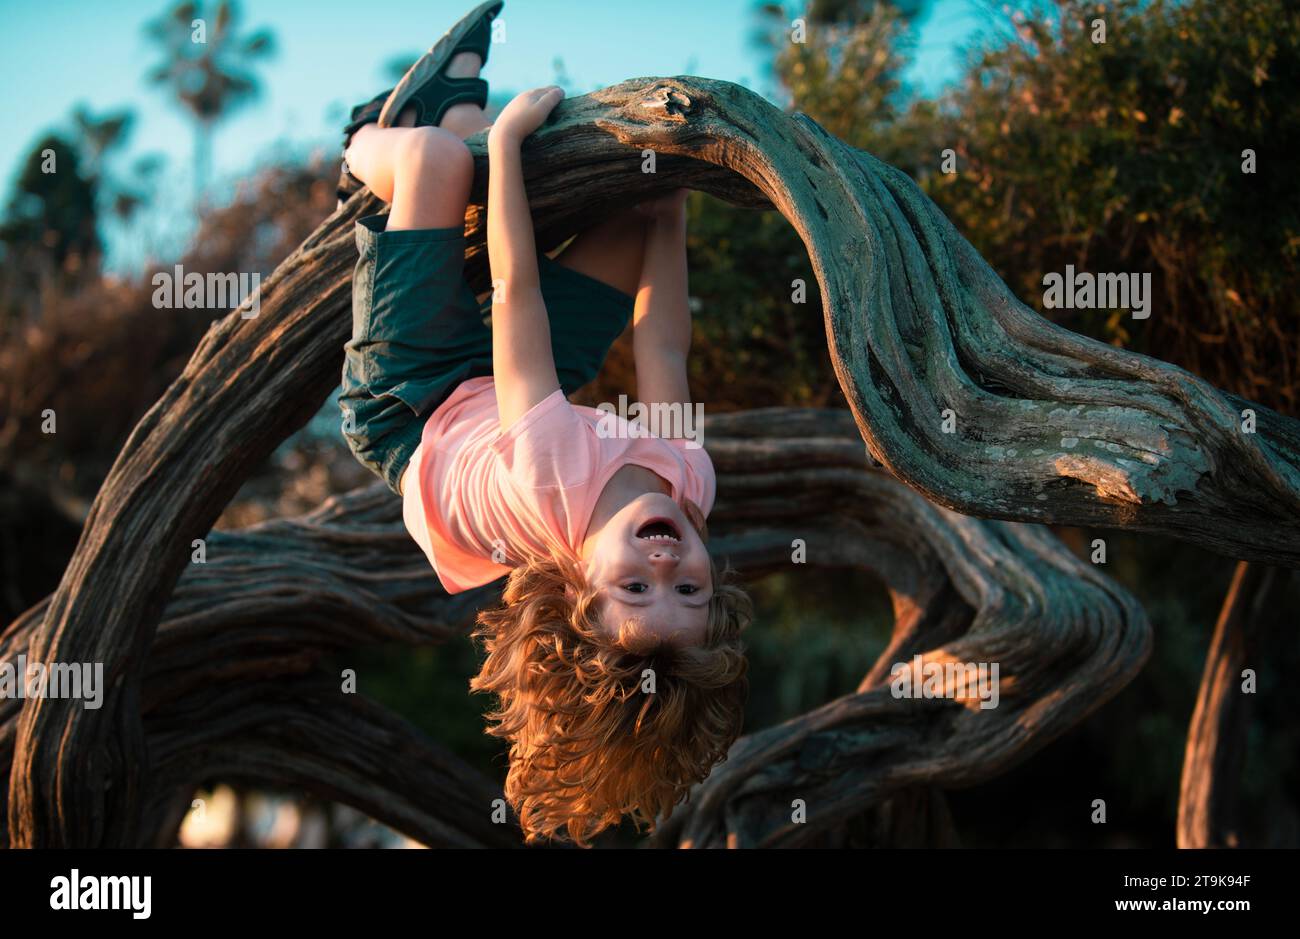 Child boy in park, climb on a tree rope. Stock Photo